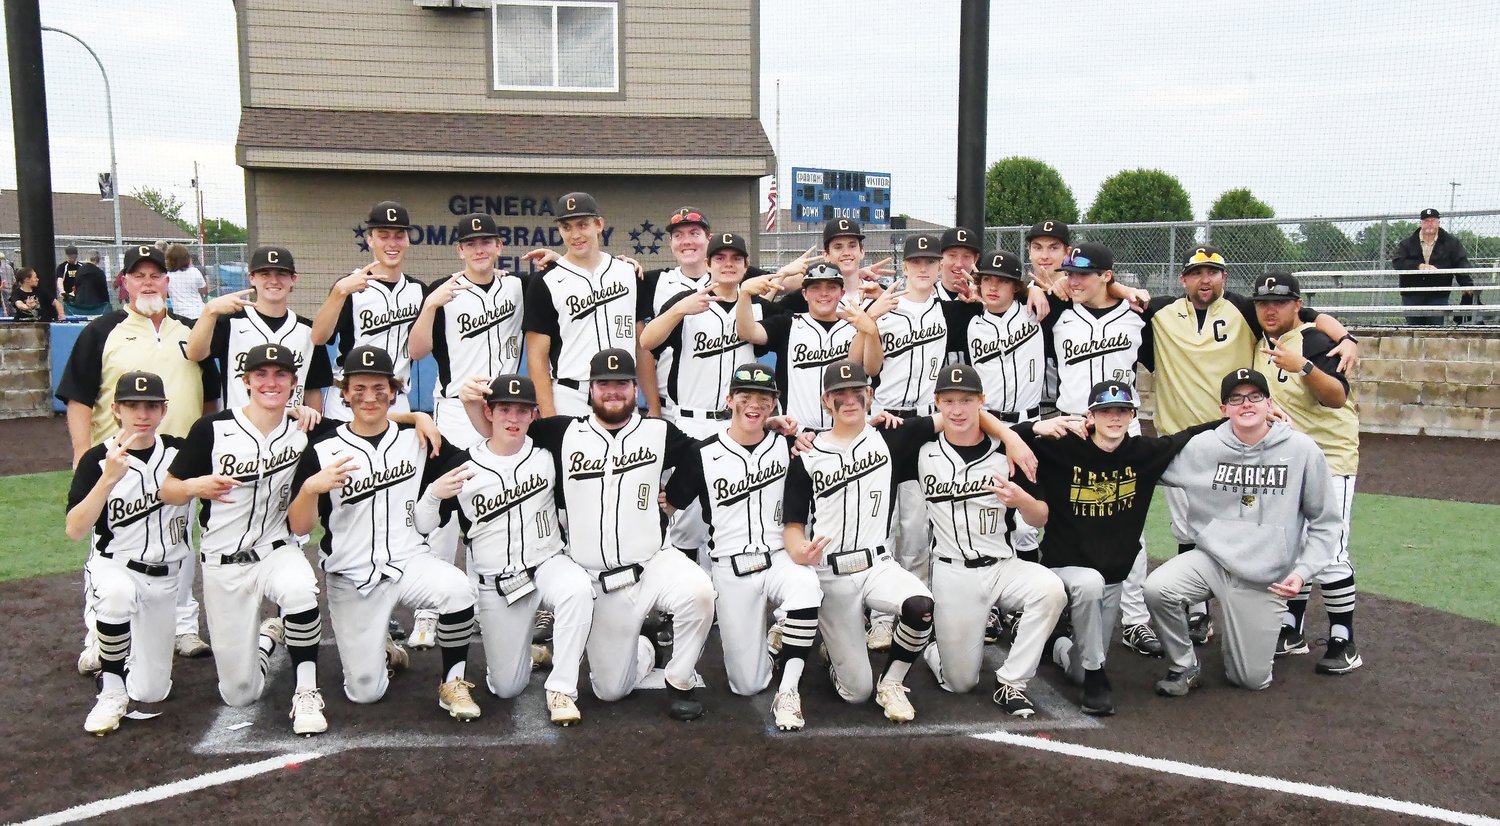 The Cairo baseball team gathers for a group photo after defeating state No. 1 ranked Northwest, 7-6, in advancing to the Class 1 state tournament in Ozark.